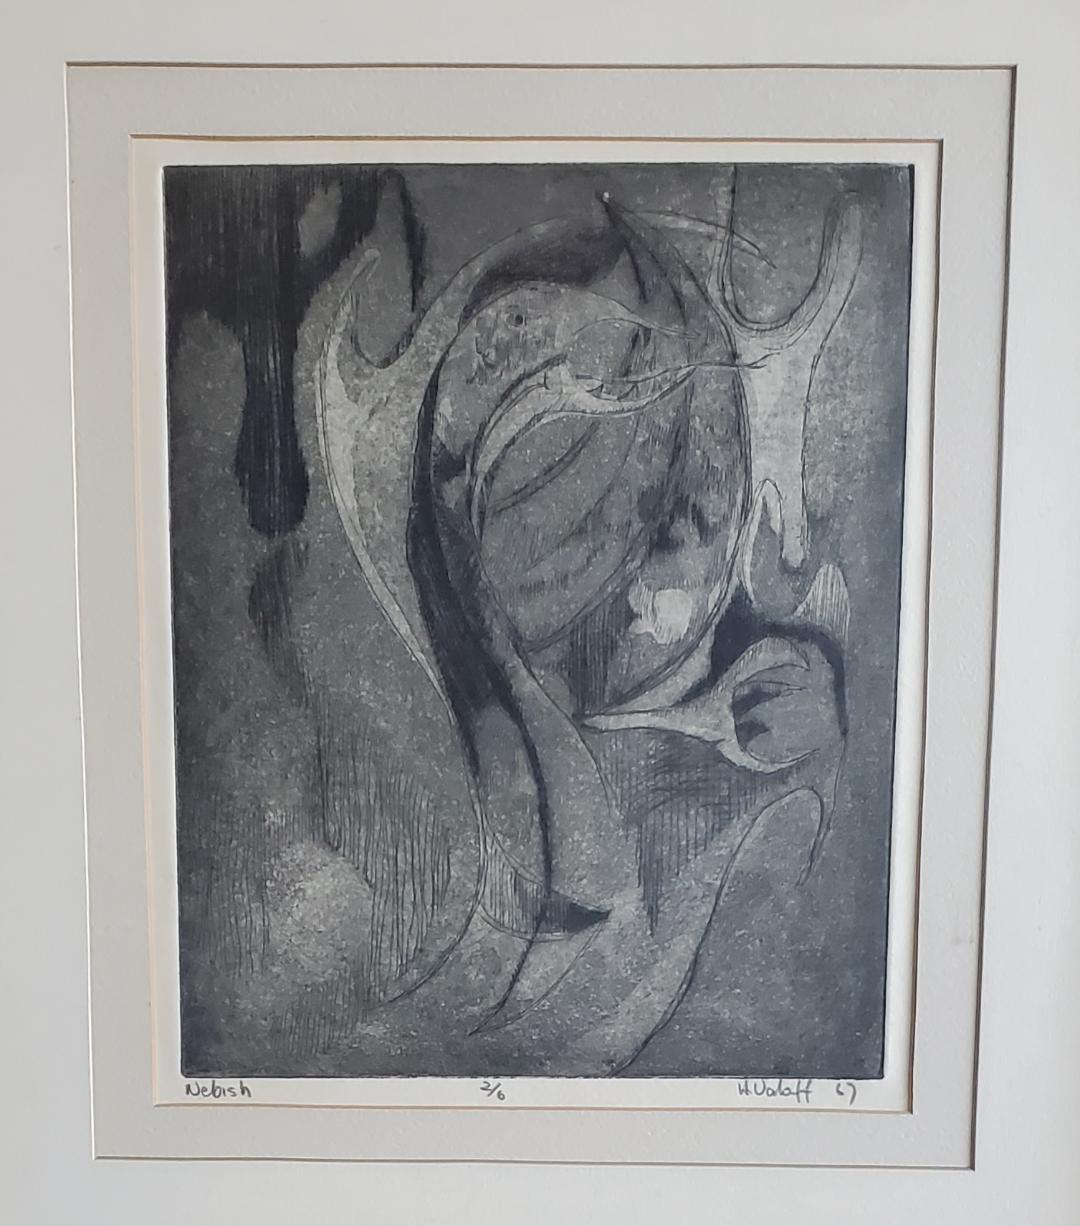 Glass 1967 Original Etching Title Date Signed Numbered 